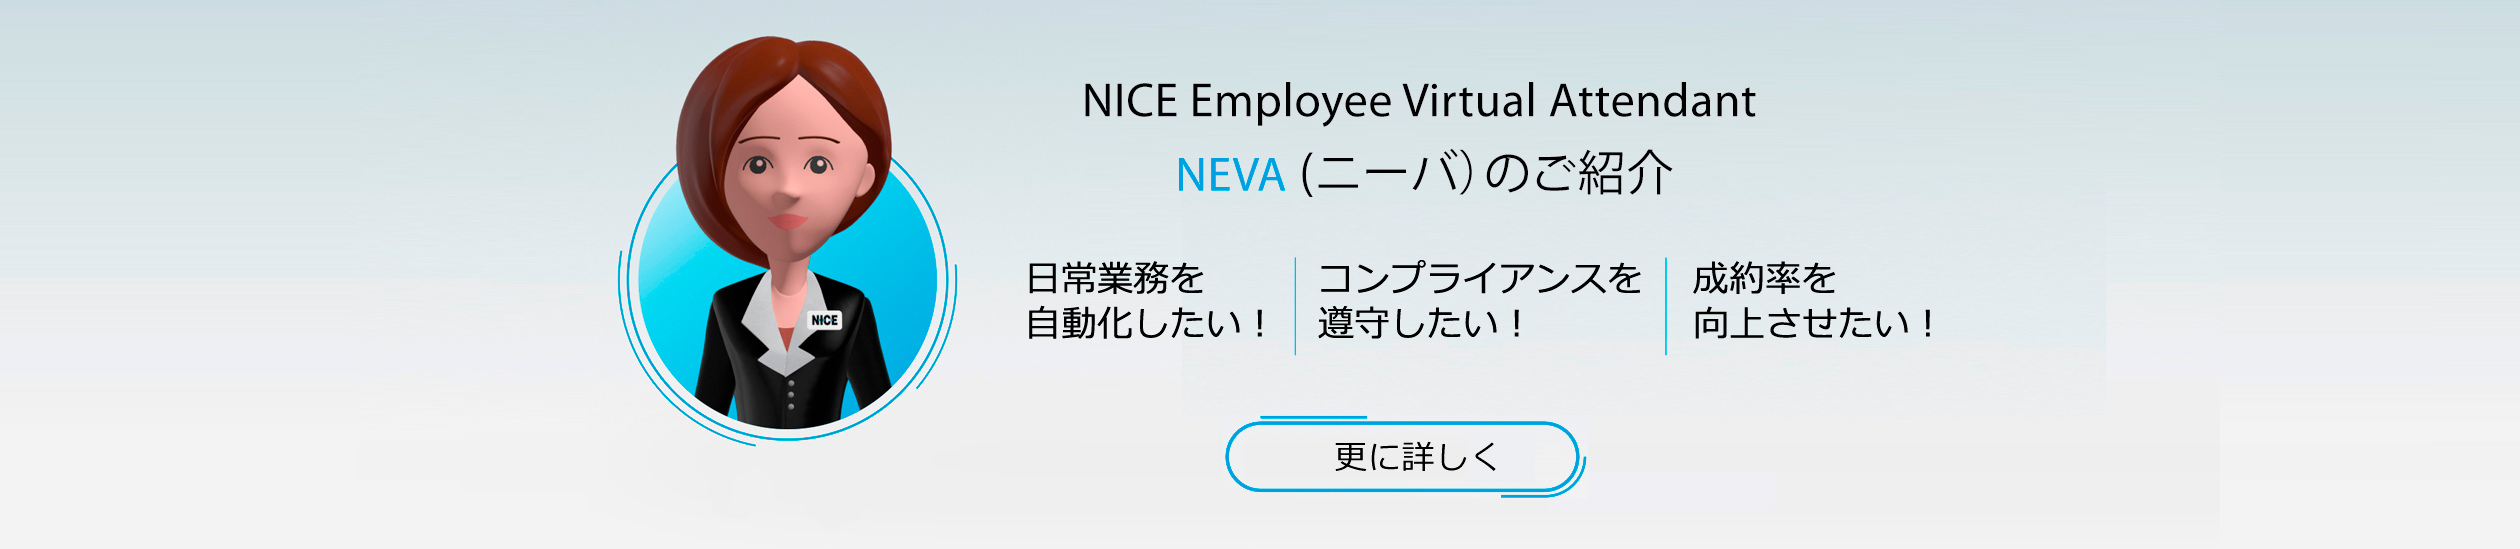 Make Automation Personal. NEVA enables a better customer experience by automating mundane tasks and guiding your employees to enhance their performance.